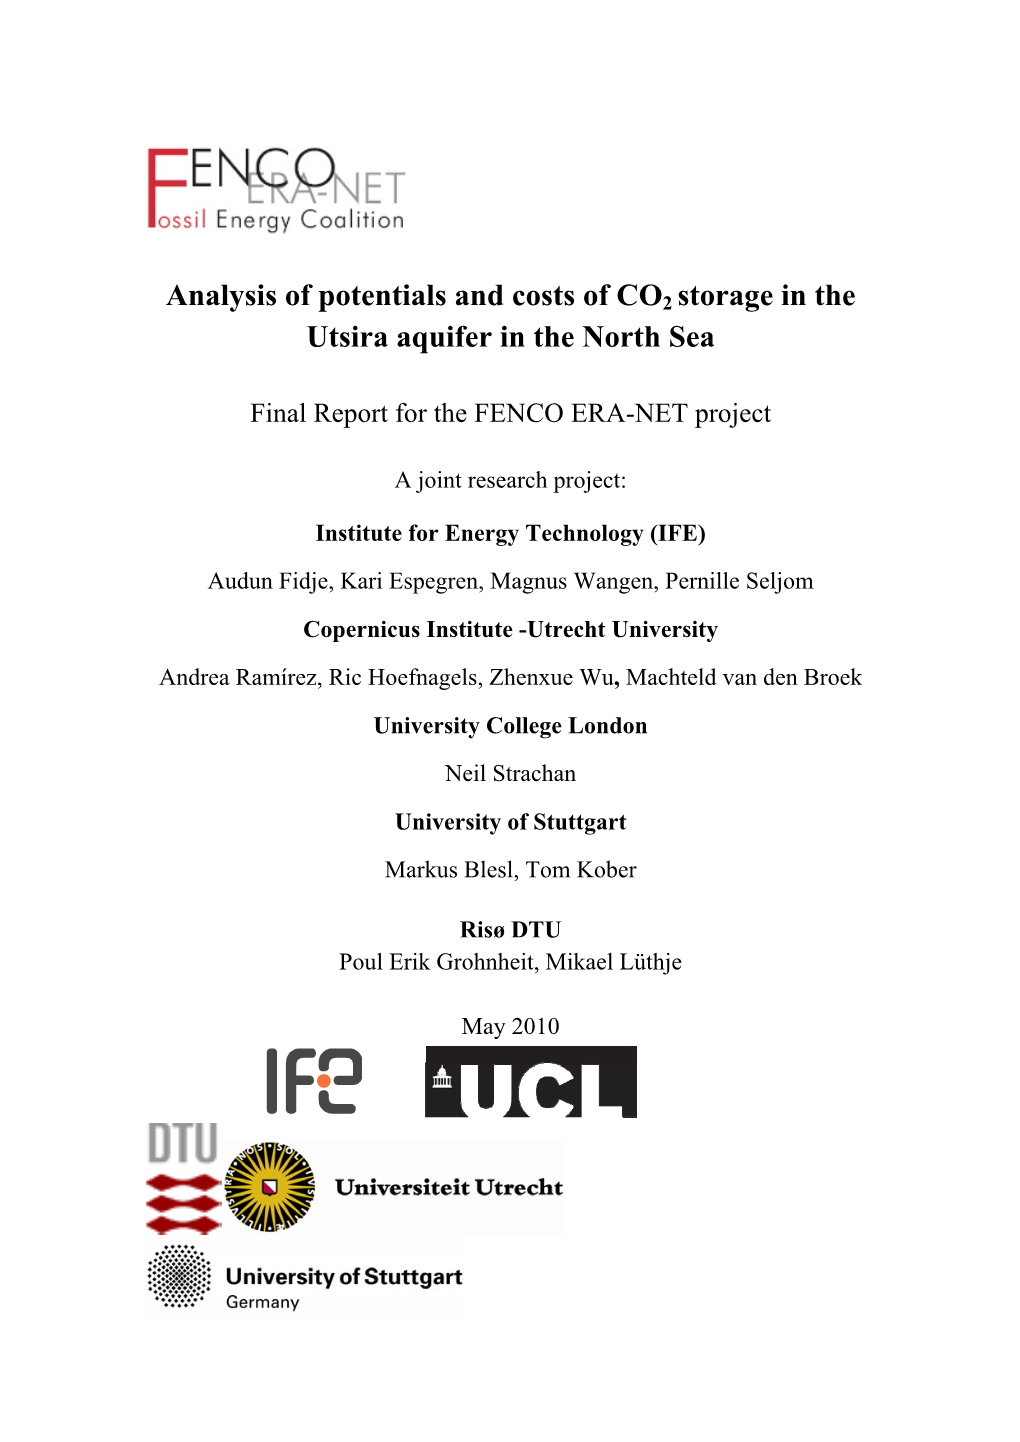 Analysis of Potentials and Costs of CO2 Storage in the Utsira Aquifer in the North Sea